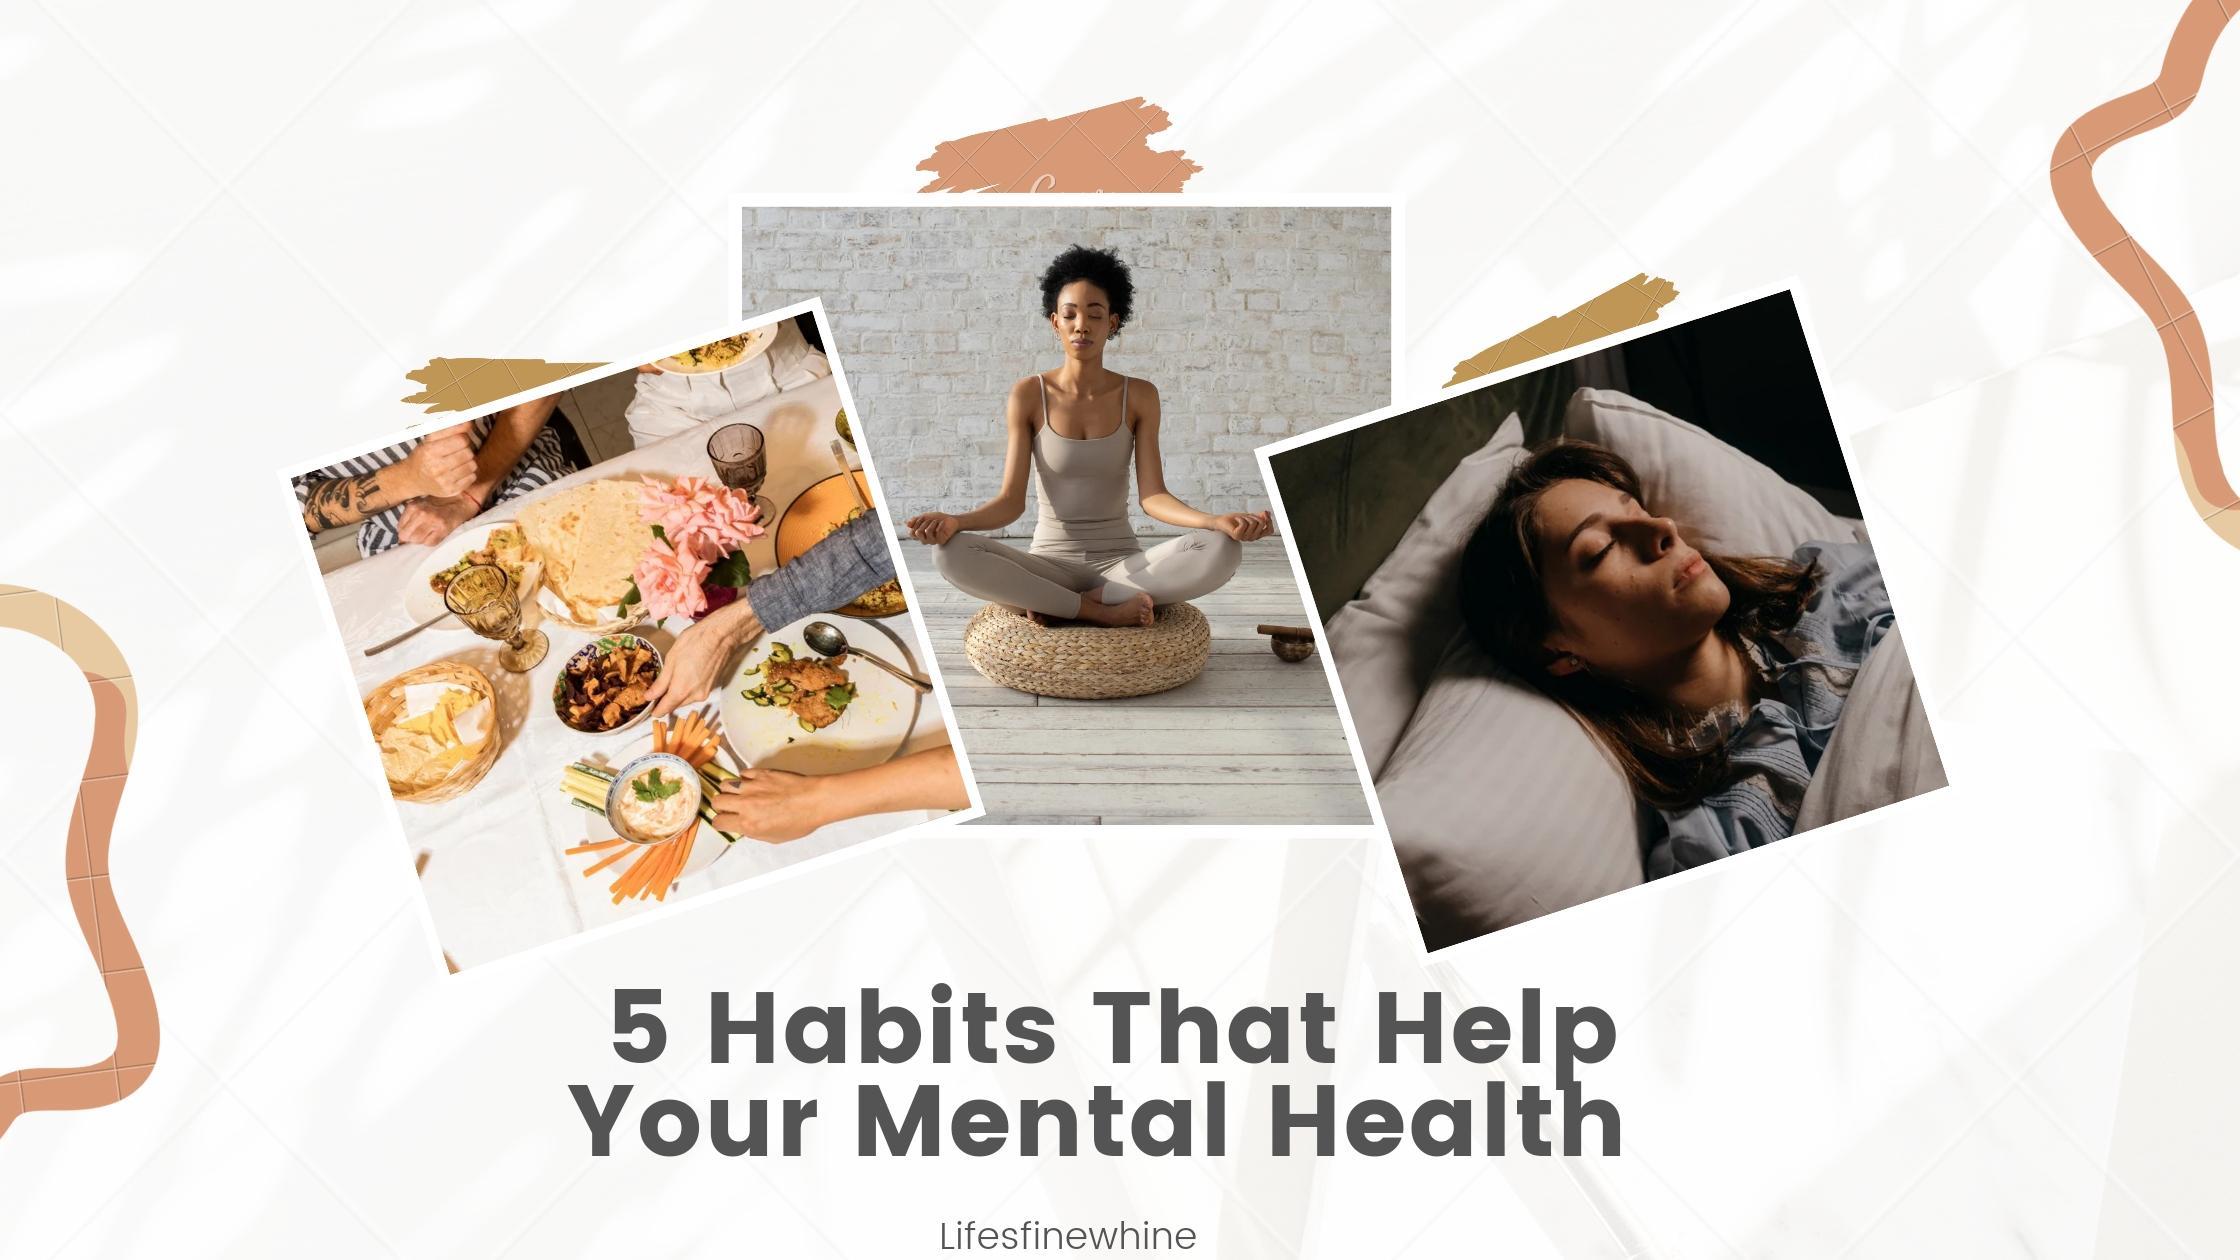 Habits That Help Your Mental Health